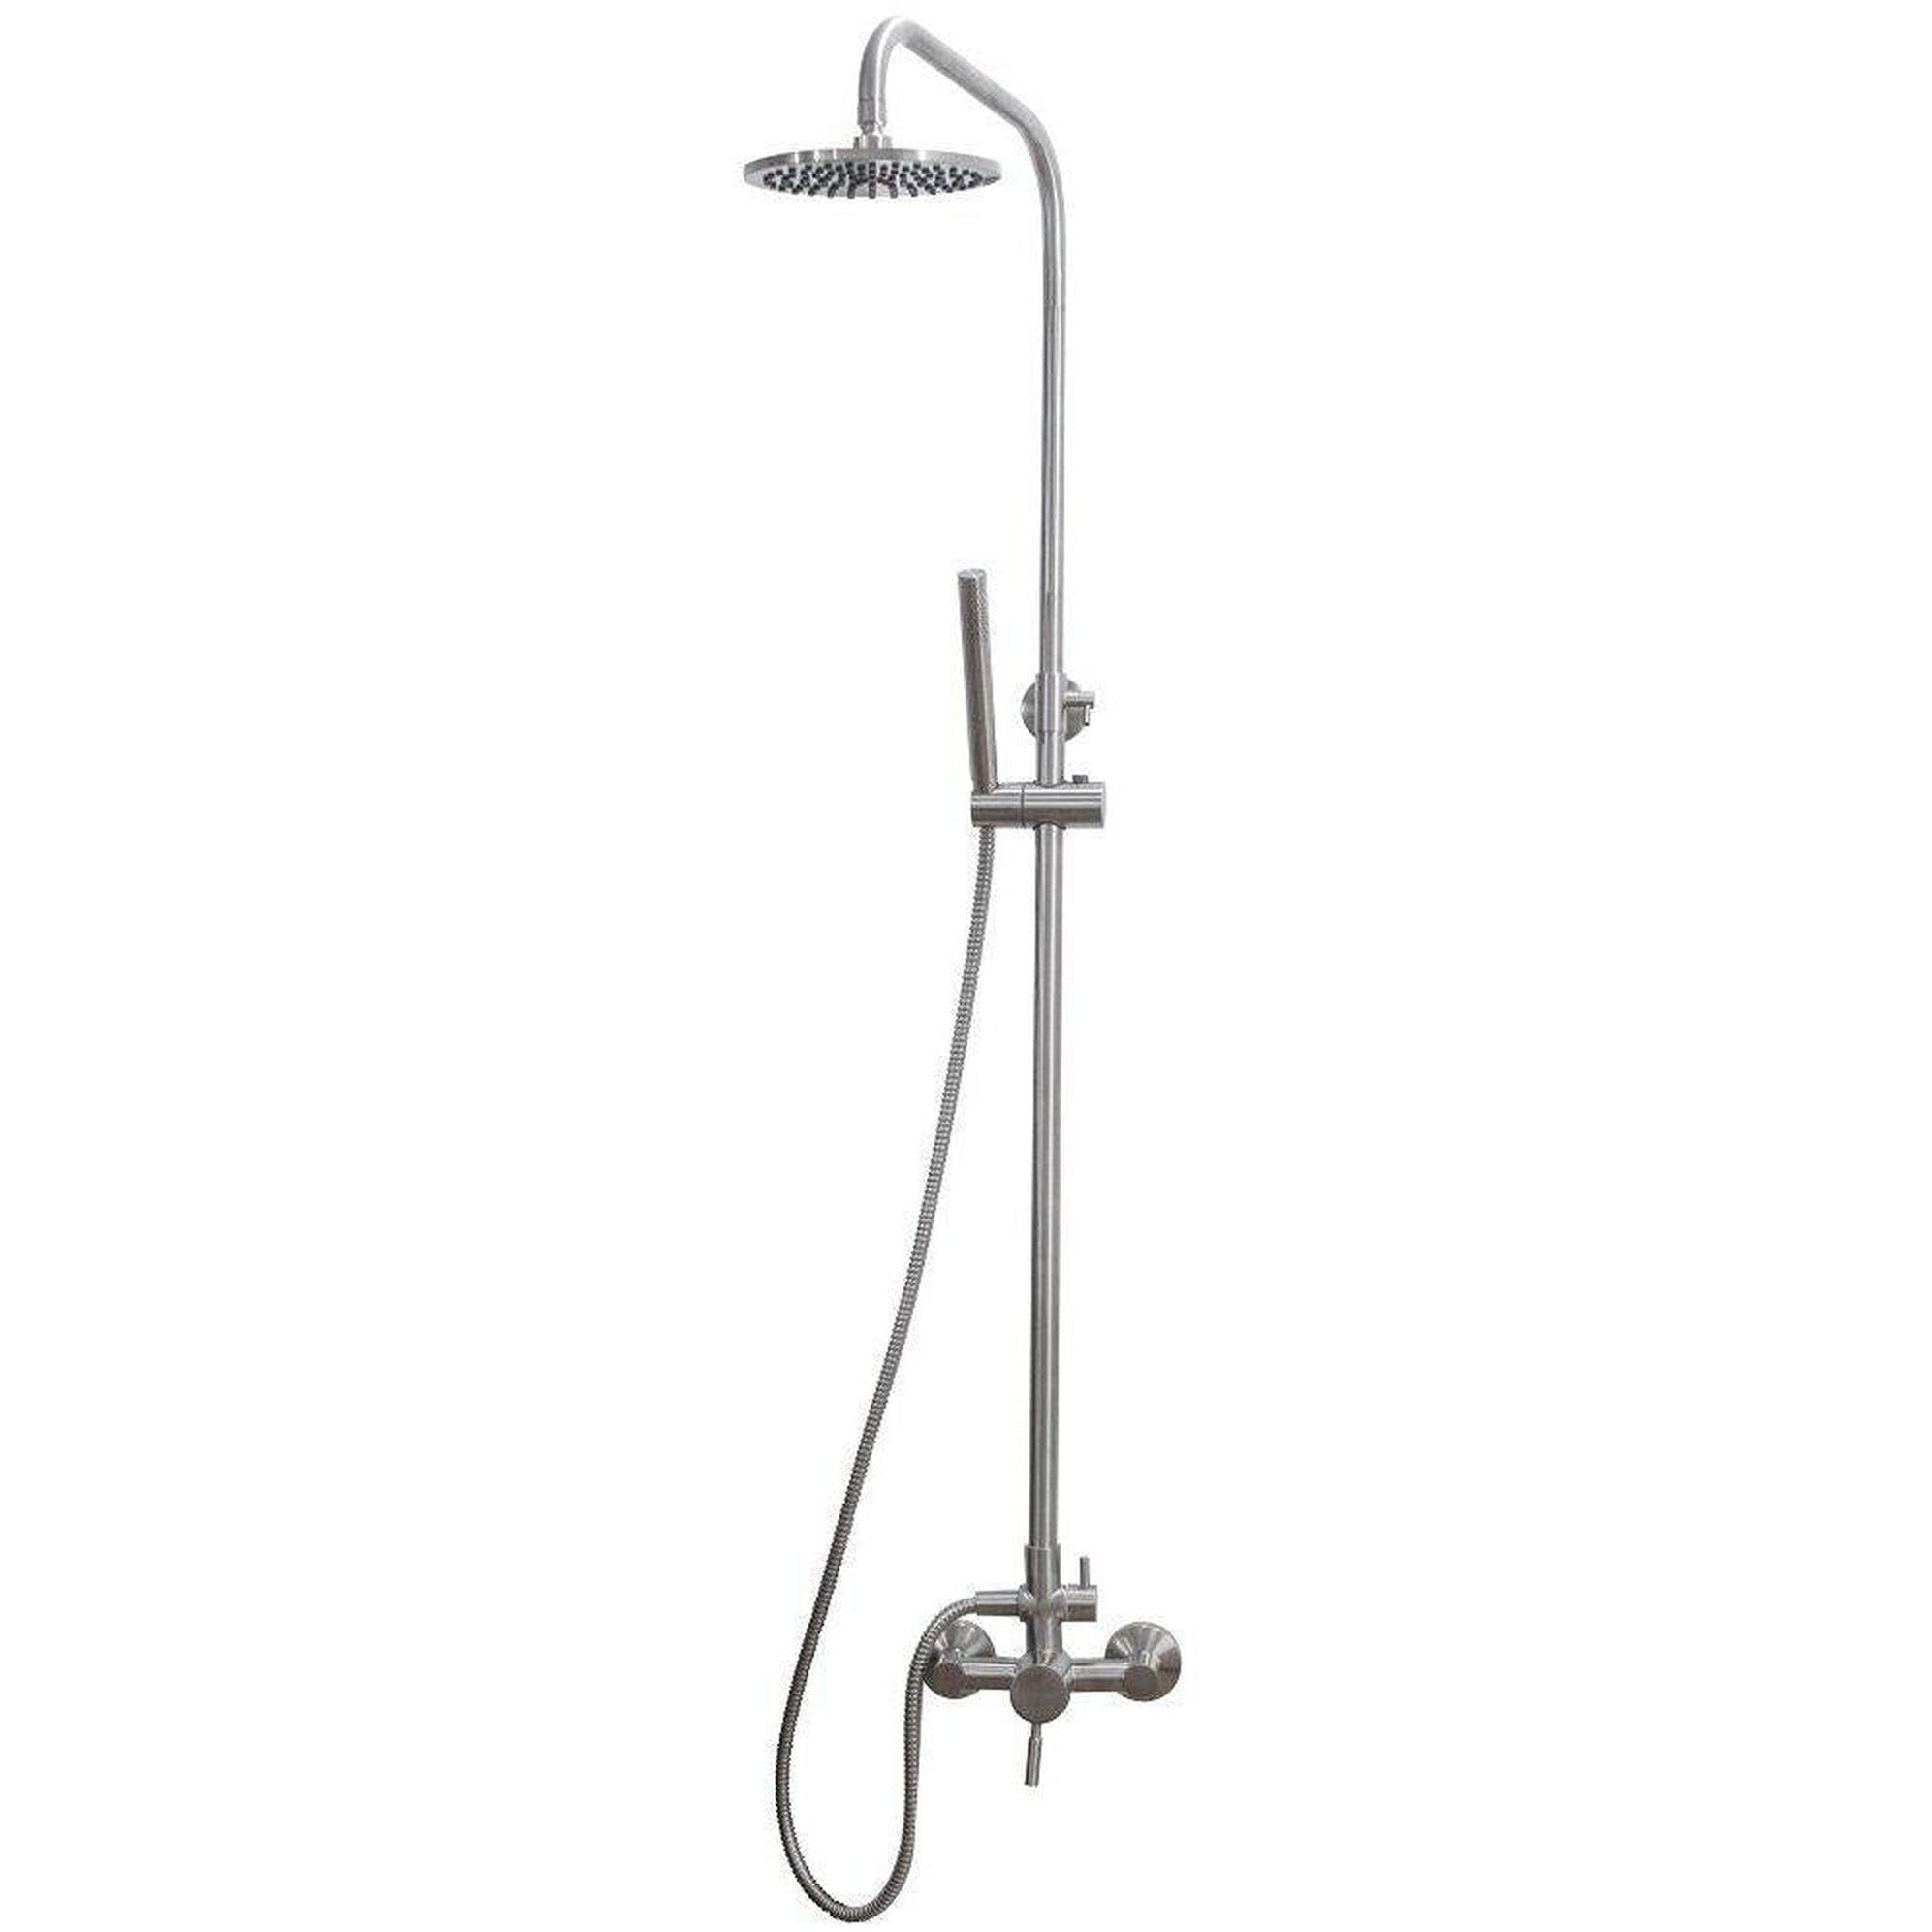 Dundalk Premium Shower Hardware SH06 -Shower Head - Shower pole with wand holder - Handle Assembly - Shower Supports - Vital Hydrotherapy